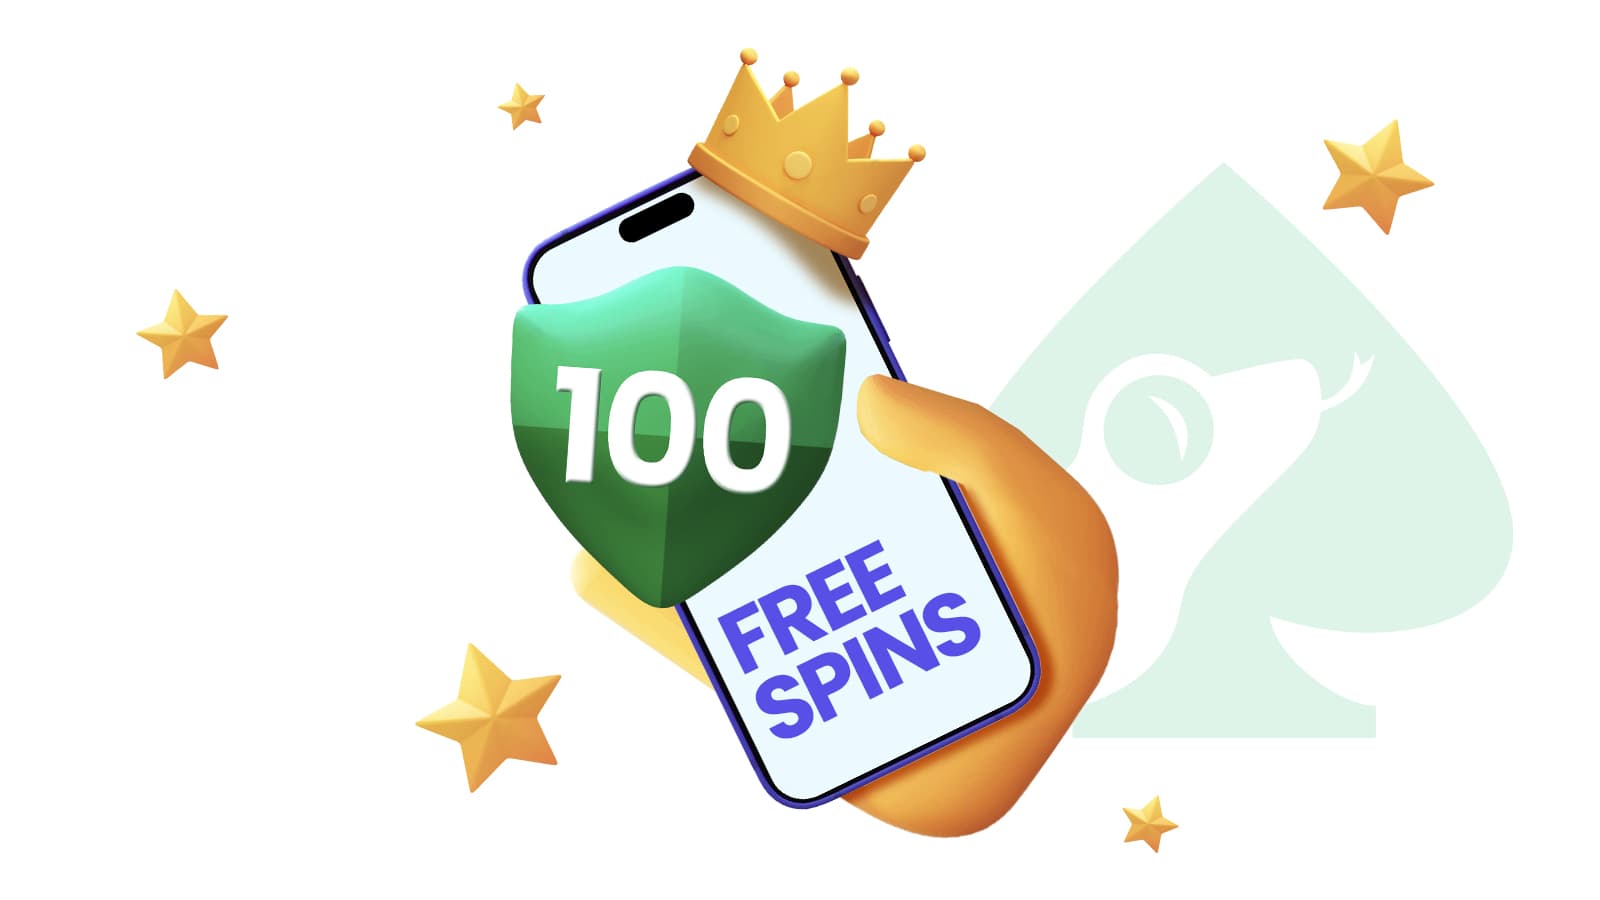 100 free spins terms and conditions